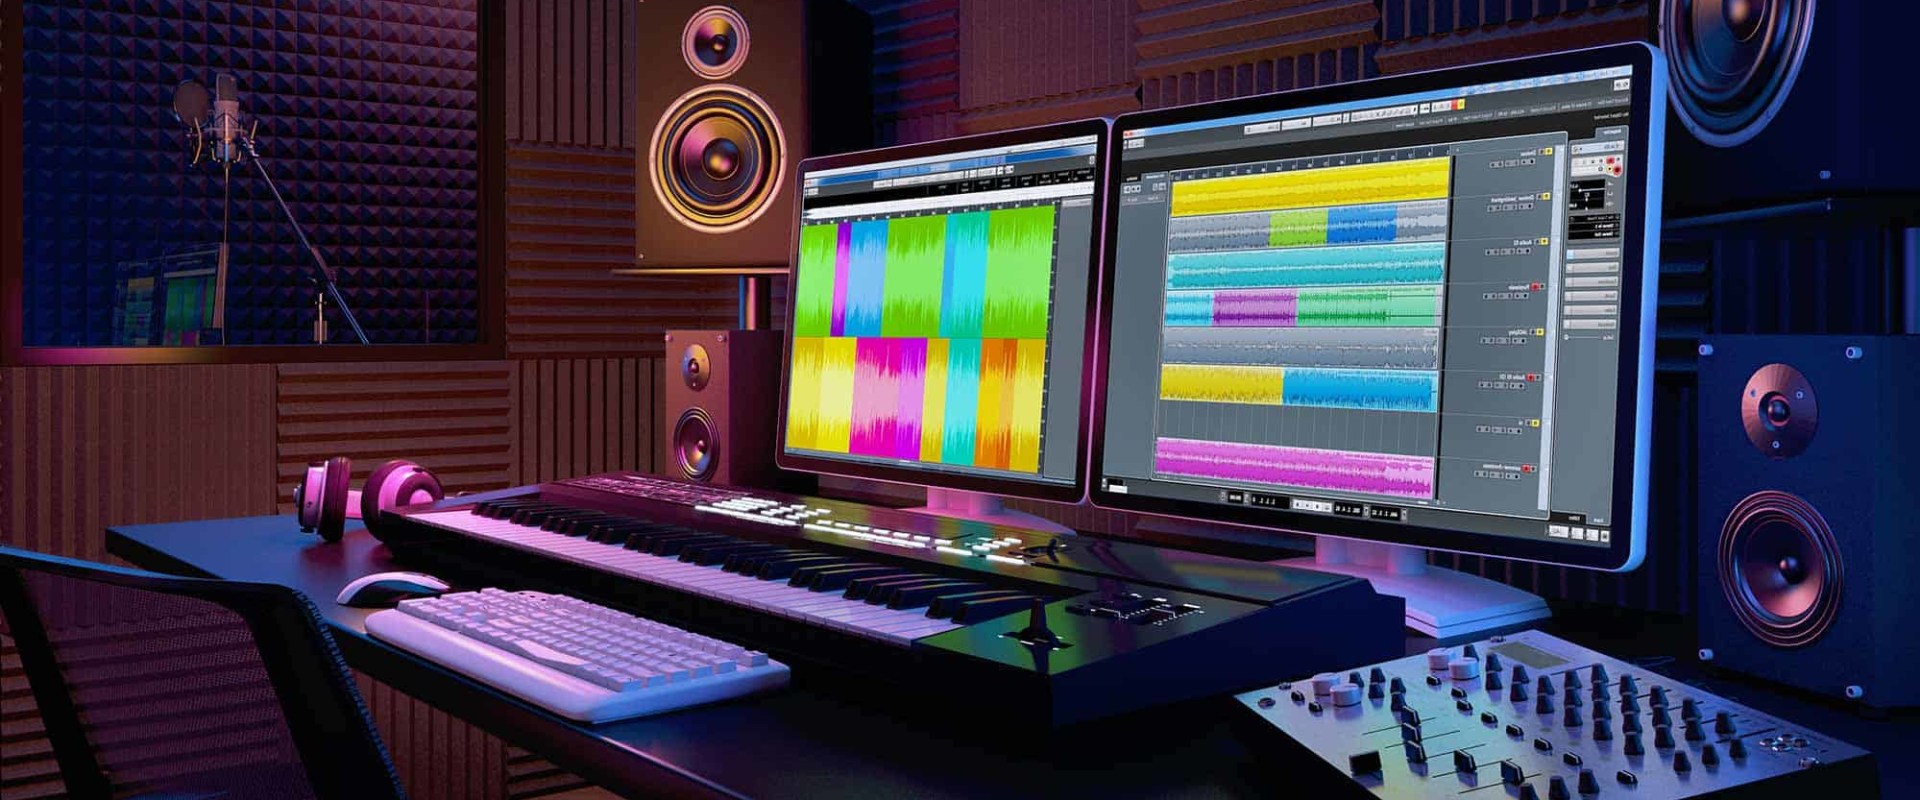 Finding Recording Studios in St. Louis, Missouri: Resources for Musicians